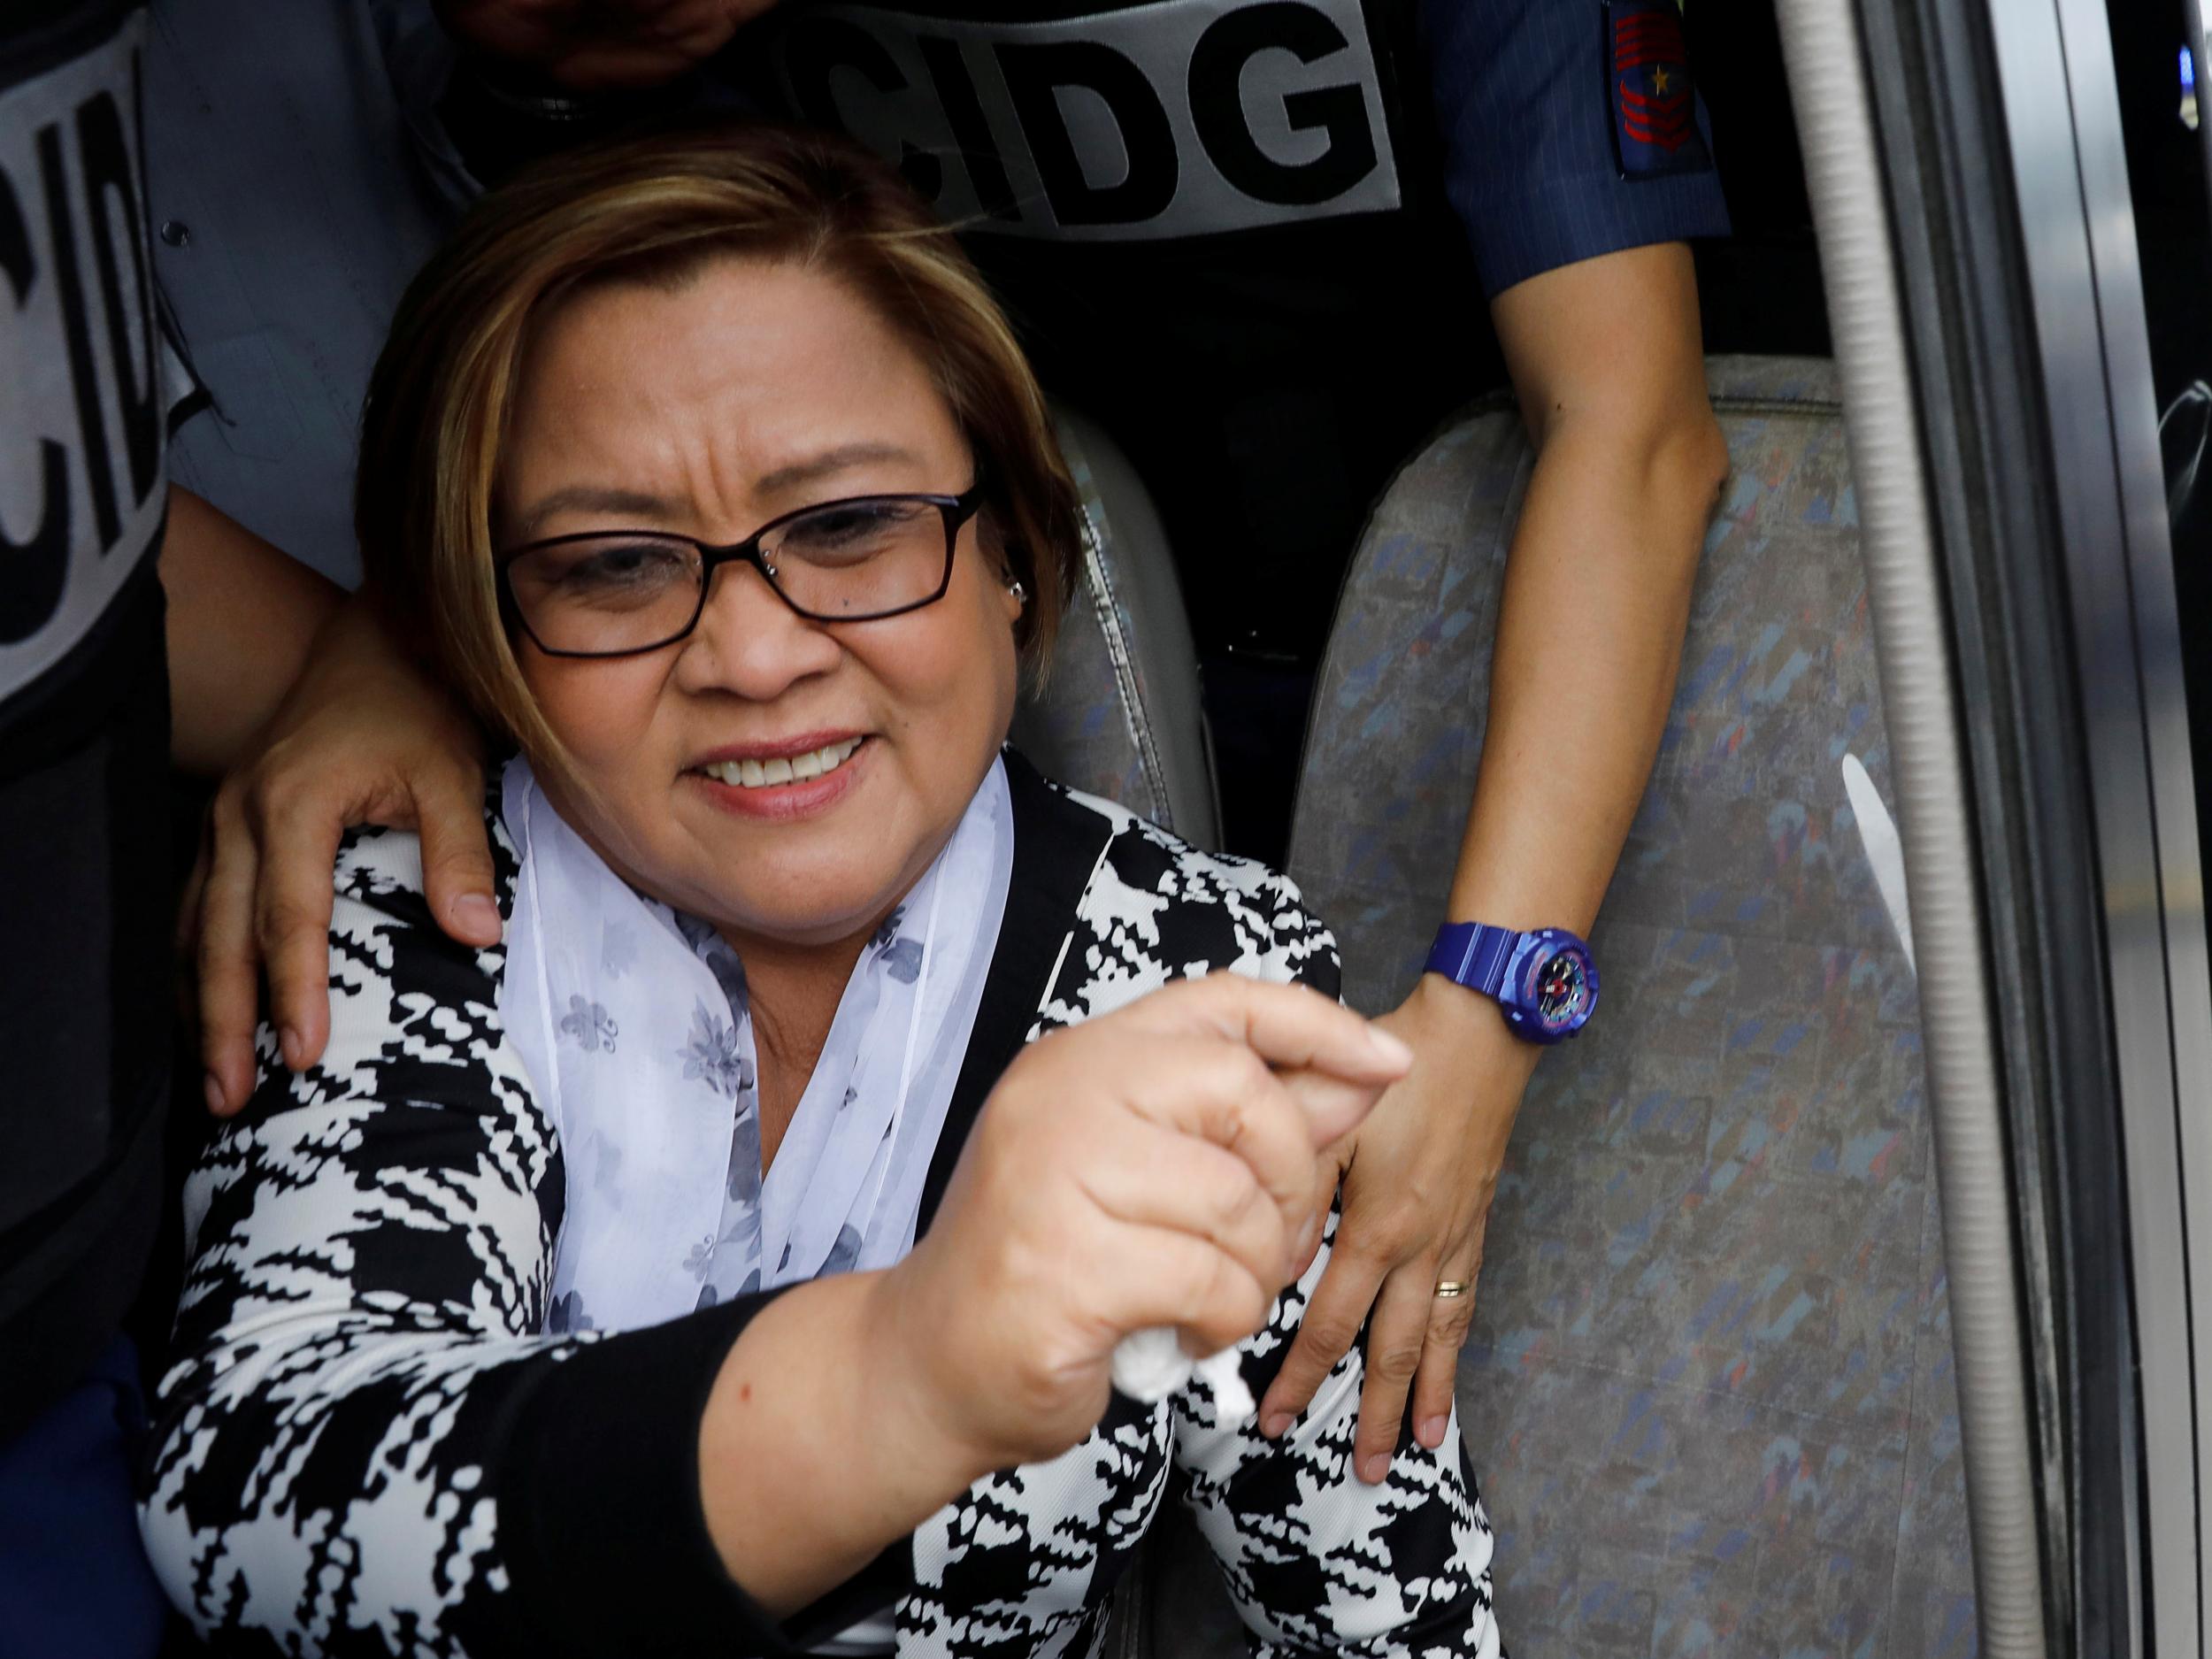 Policemen guard Philippine Senator Leila De Lima inside a a police van after appearing at a Muntinlupa court on drug charges in Muntinlupa, Metro Manila